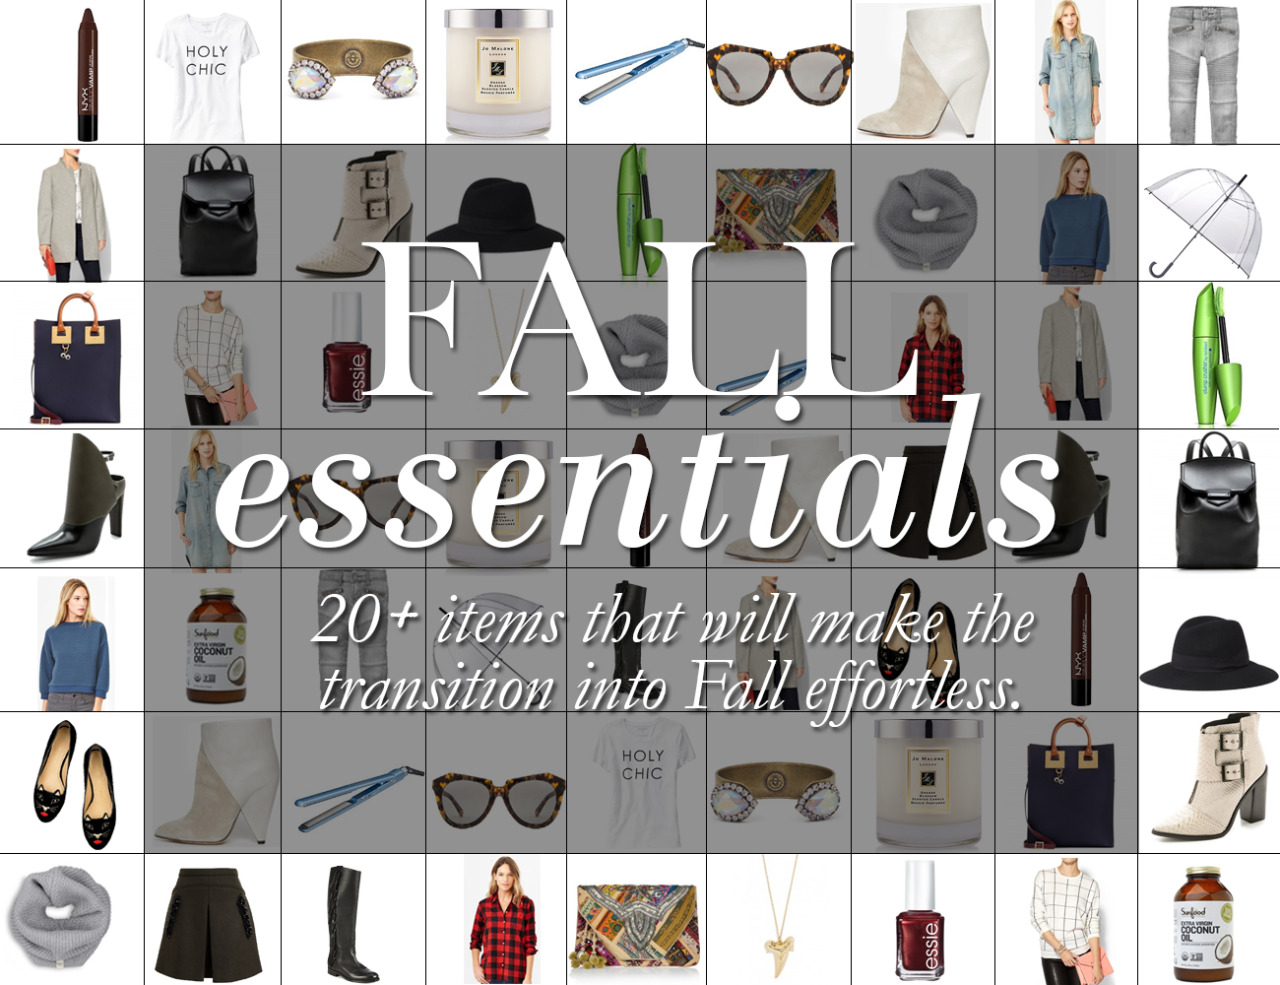 Fall 2014 Essentials...28 items that will make the transition into Fall effortless